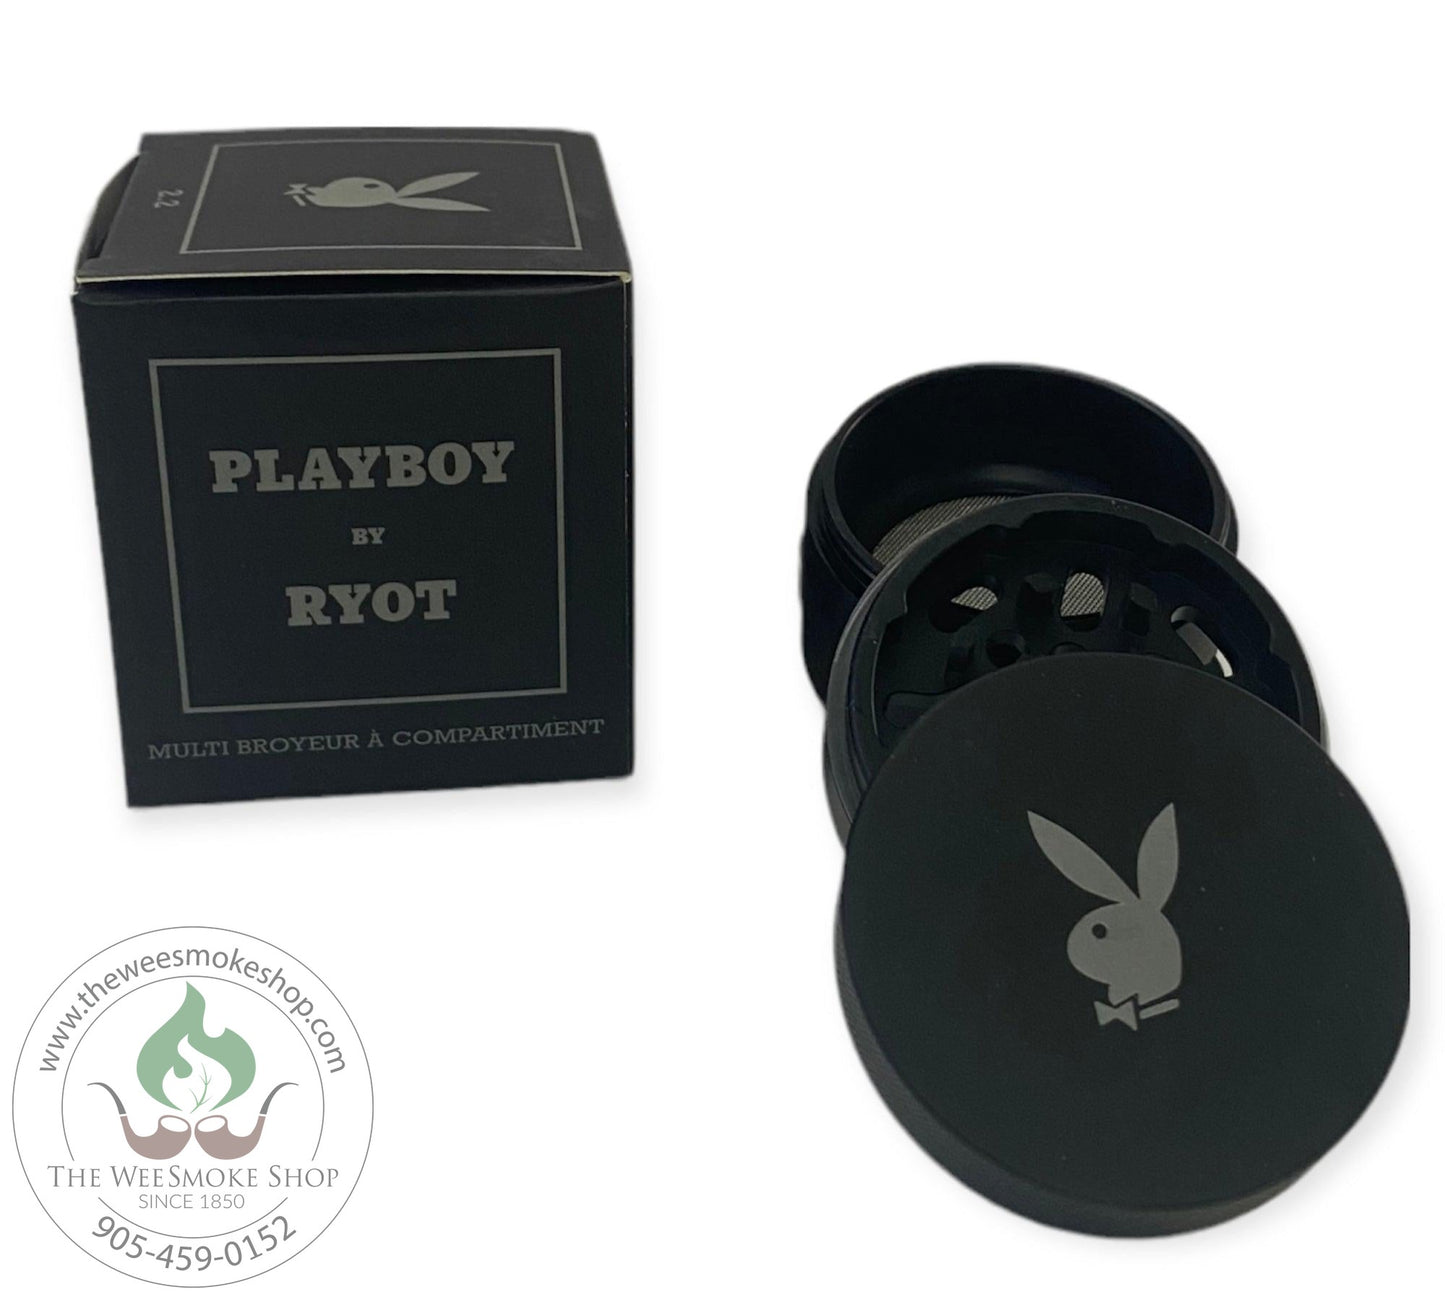 Playboy by Ryot 4 Part Grinder